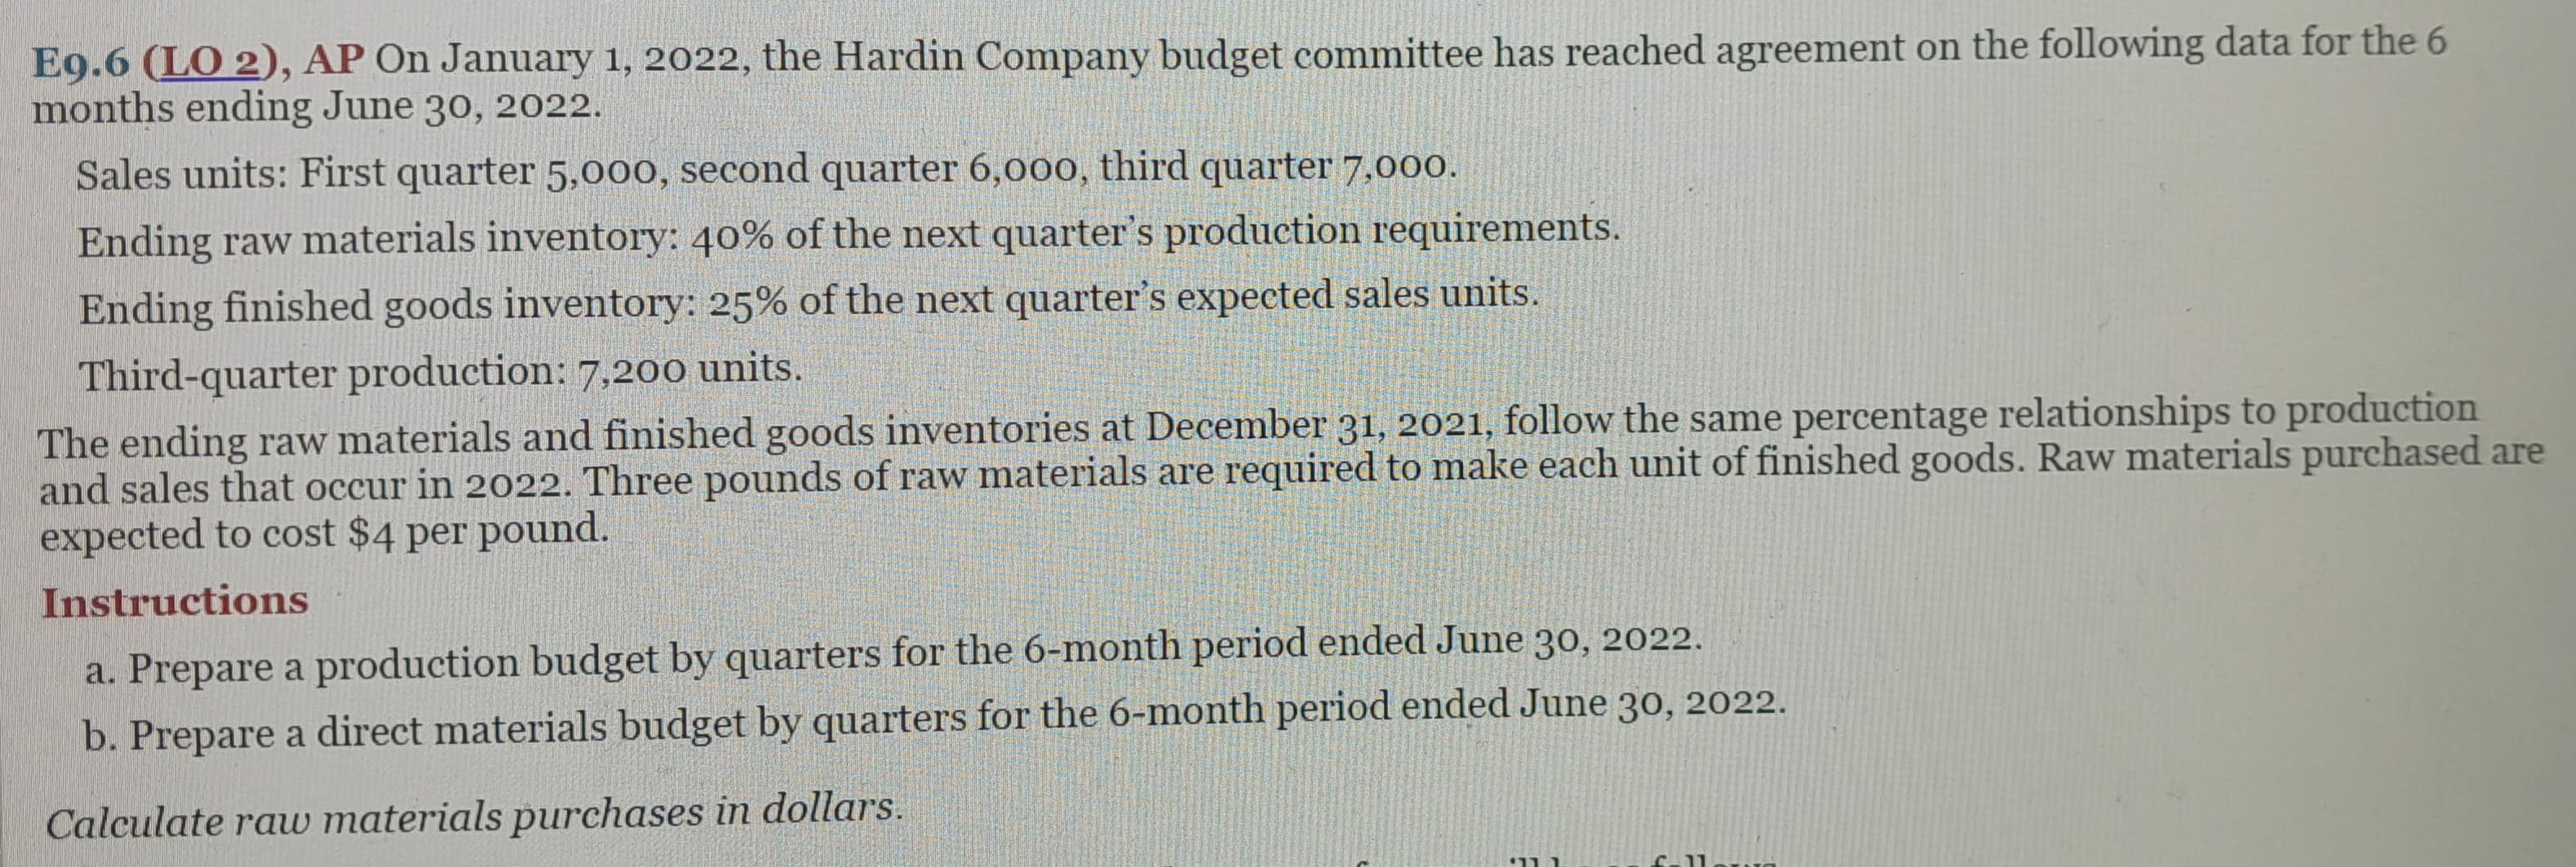 E9.6 (LO 2), AP On January 1, 2022, the Hardin Company budget committee has reached agreement on the following data for the 6
months ending June 30, 2022.
Sales units: First quarter 5,000, second quarter 6,000, third quarter 7,000.
Ending raw materials inventory: 40% of the next quarter's production requirements.
Ending finished goods inventory: 25% of the next quarter's expected sales units.
Third-quarter production: 7,200 units.
The ending raw materials and finished goods inventories at December 31, 2021, follow the same percentage relationships to production
and sales that occur in 2022. Three pounds of raw materials are required to make each unit of finished goods. Raw materials purchased are
expected to cost $4 per pound.
Instructions
a. Prepare a production budget by quarters for the 6-month period ended June 30, 2022.
b. Prepare a direct materials budget by quarters for the 6-month period ended June 30, 2022.
Calculate raw materials purchases in dollars.